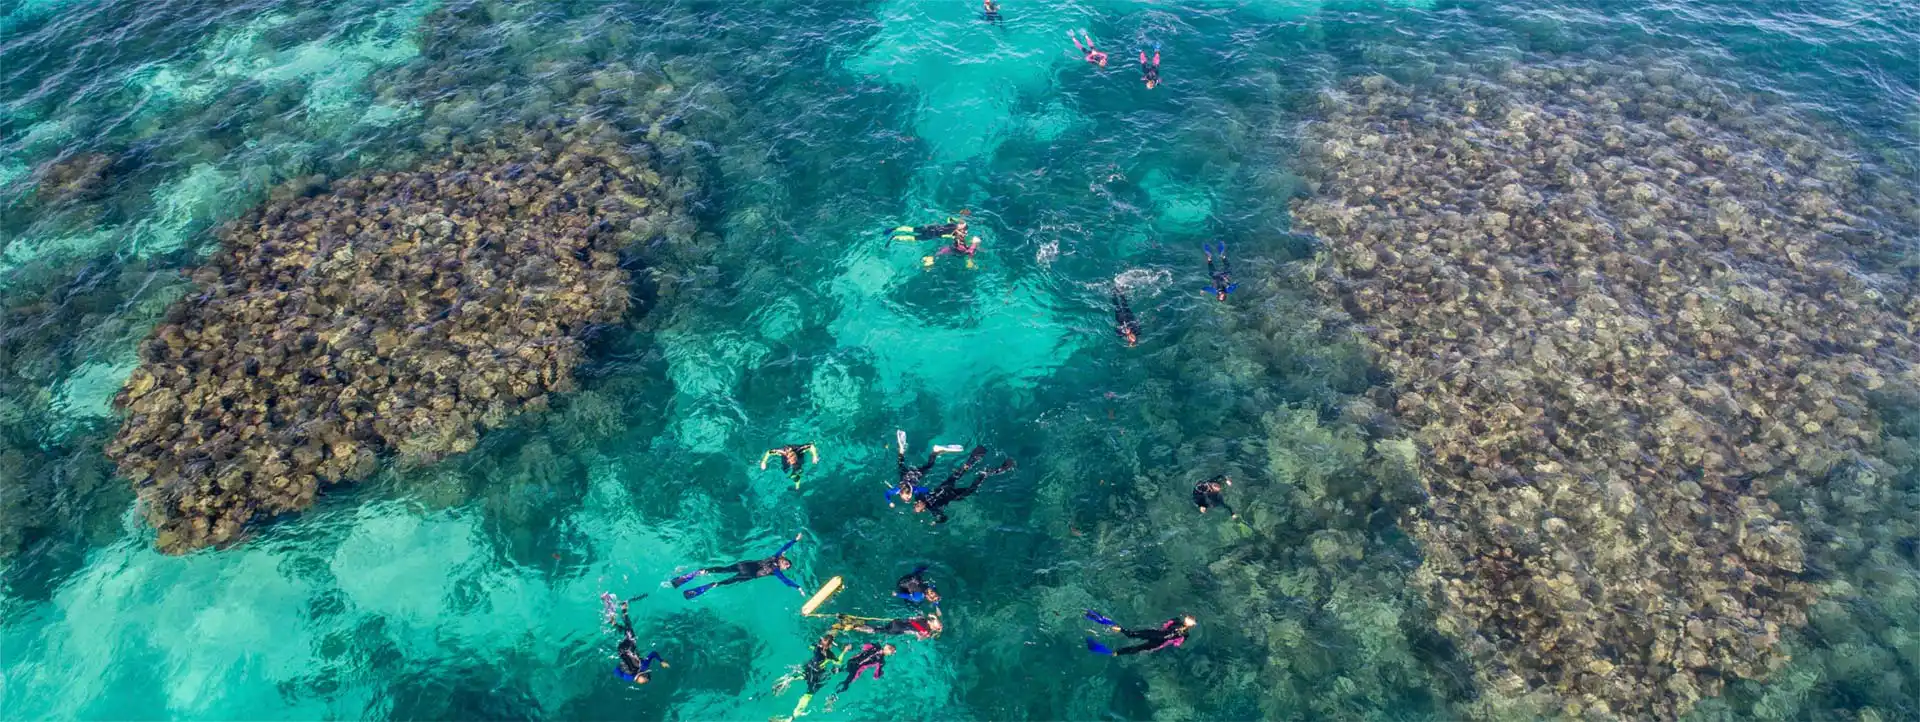 CORAL-BAY-ECO-TOURS-snorkelling-drone-photo